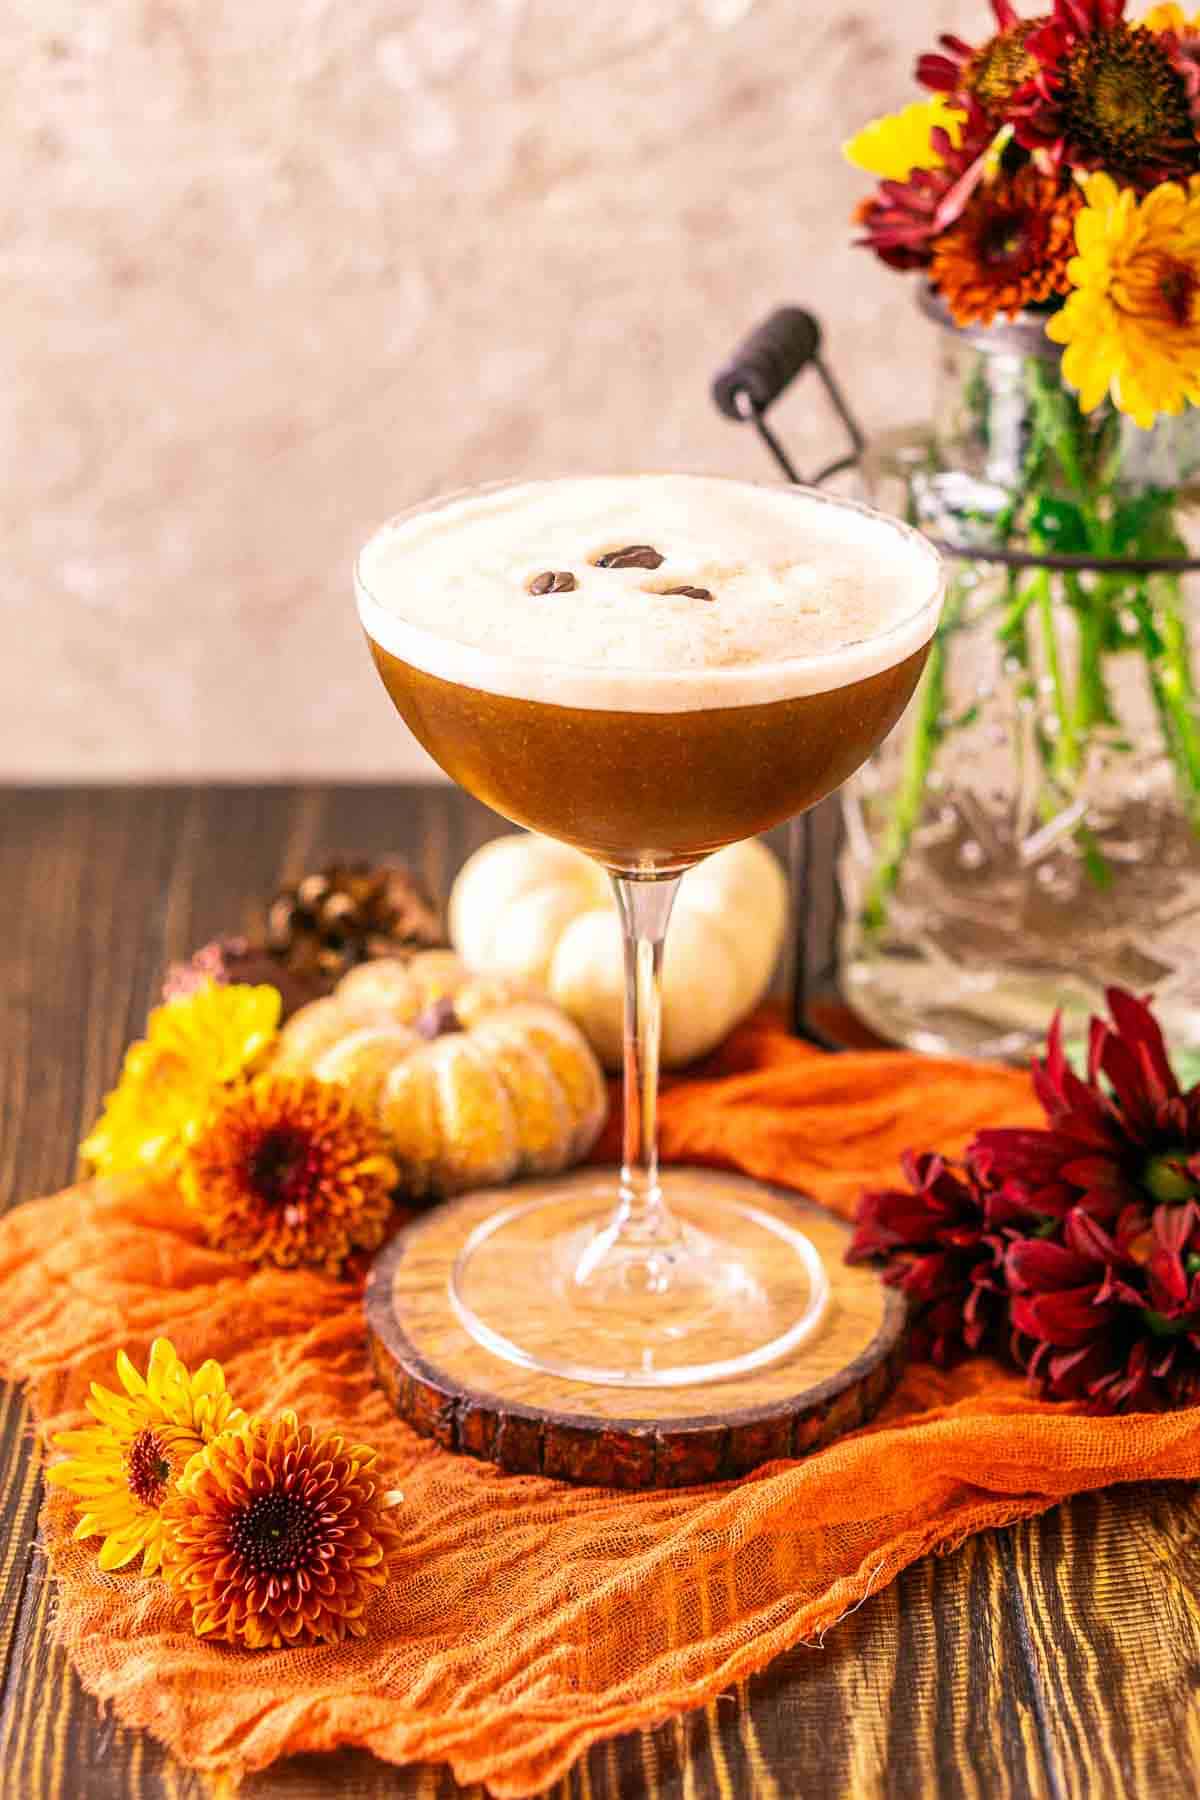 A pumpkin spice espresso martini on a wooden coaster with fall-colored flowers around it and a vase to the right.